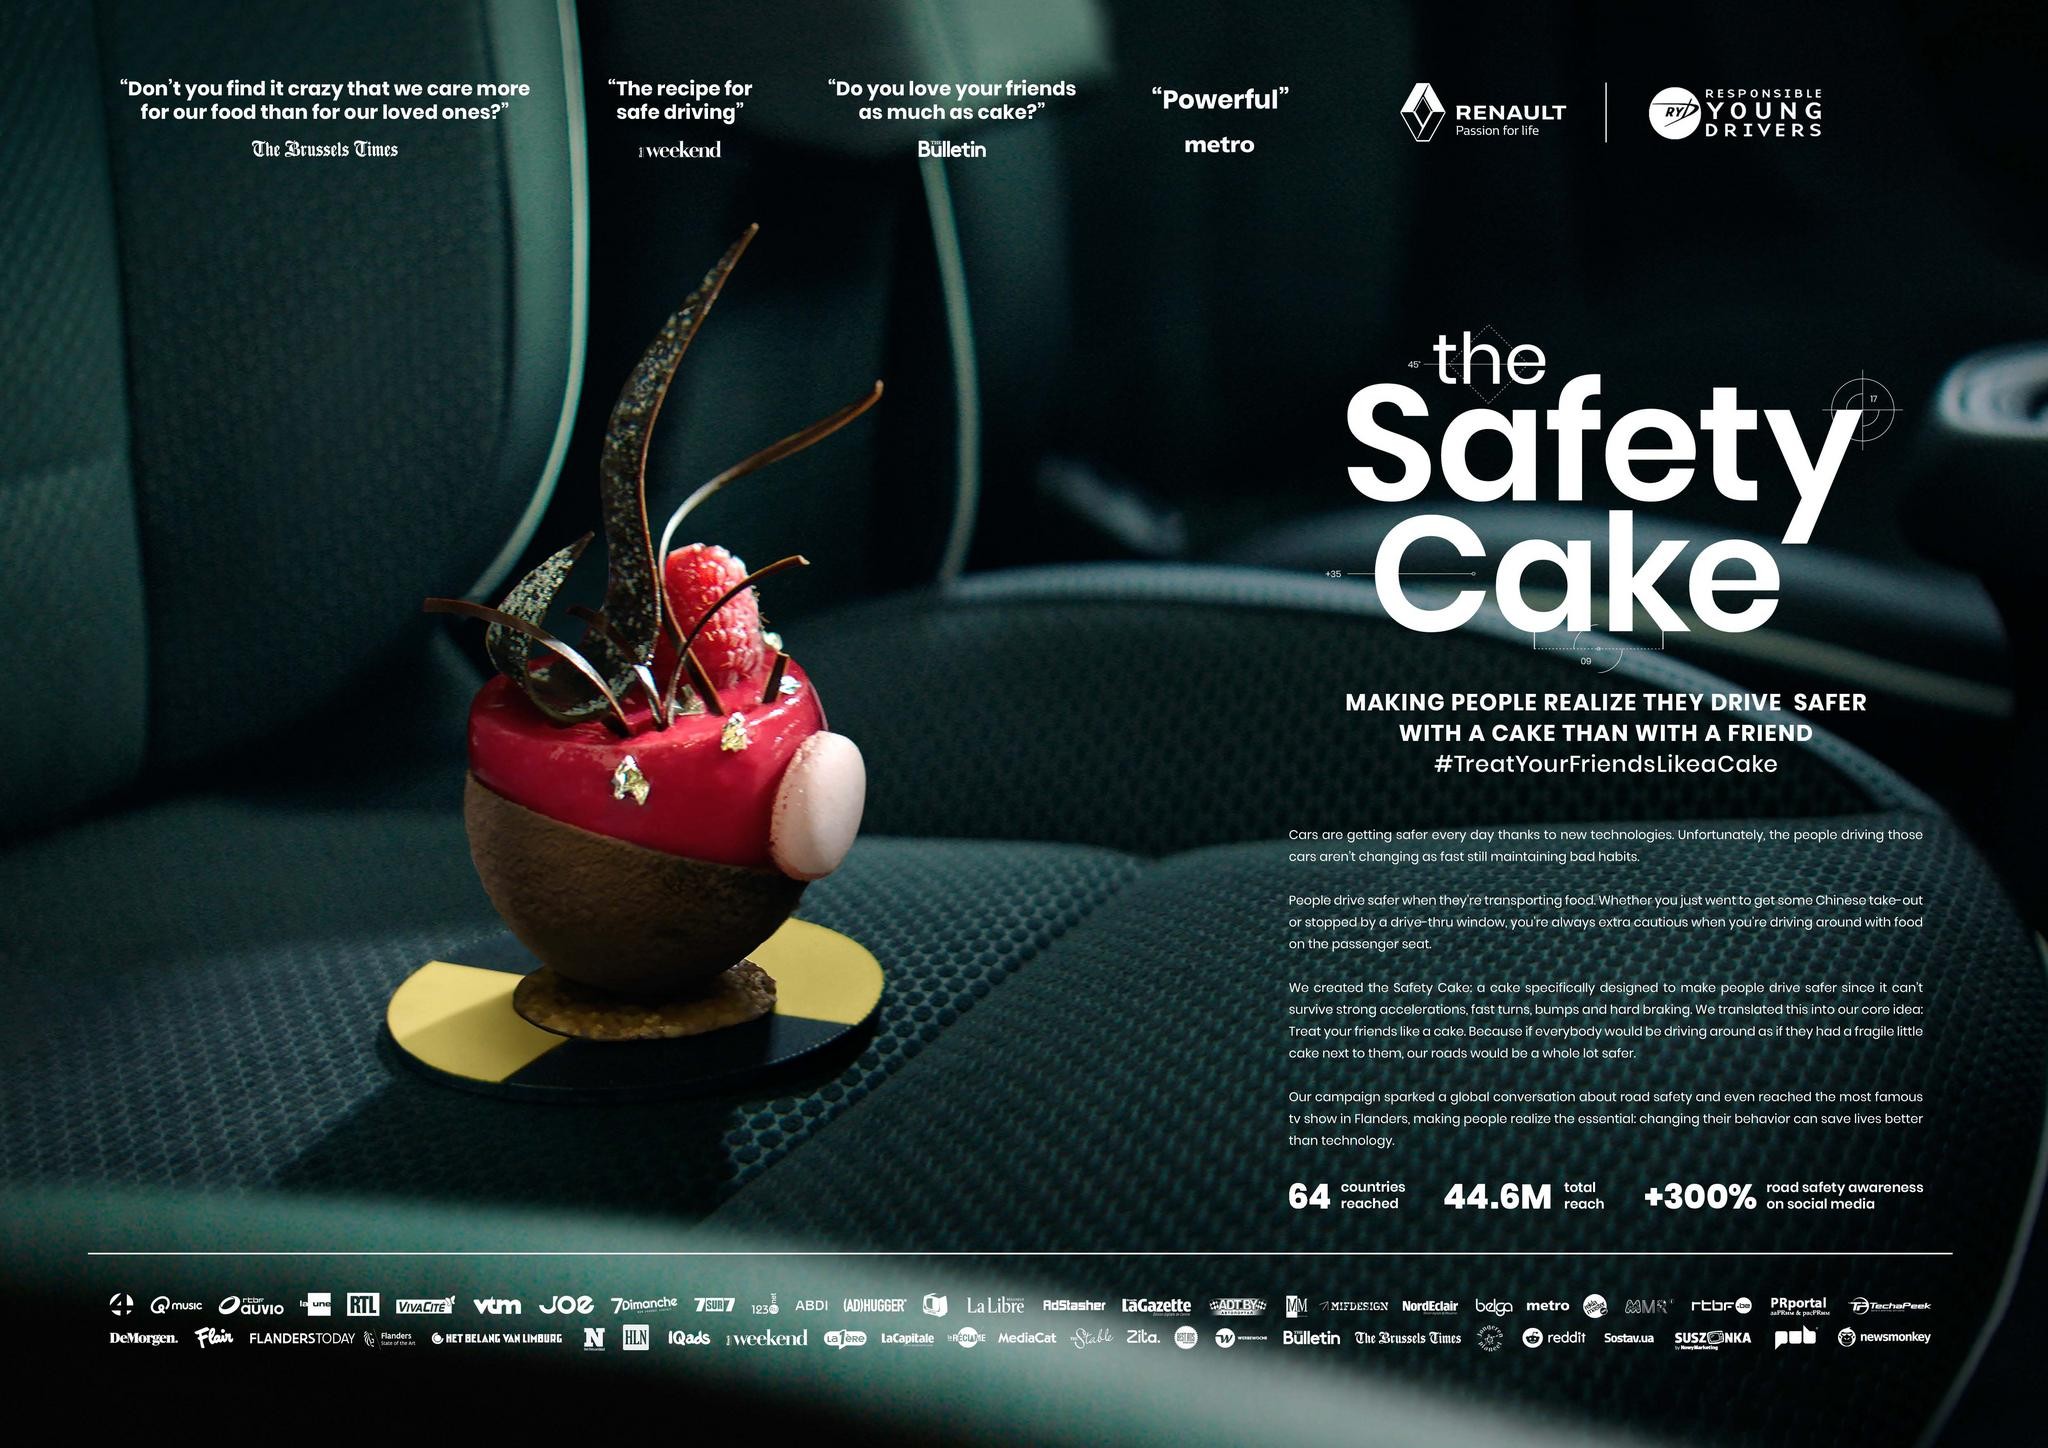 The Safety Cake